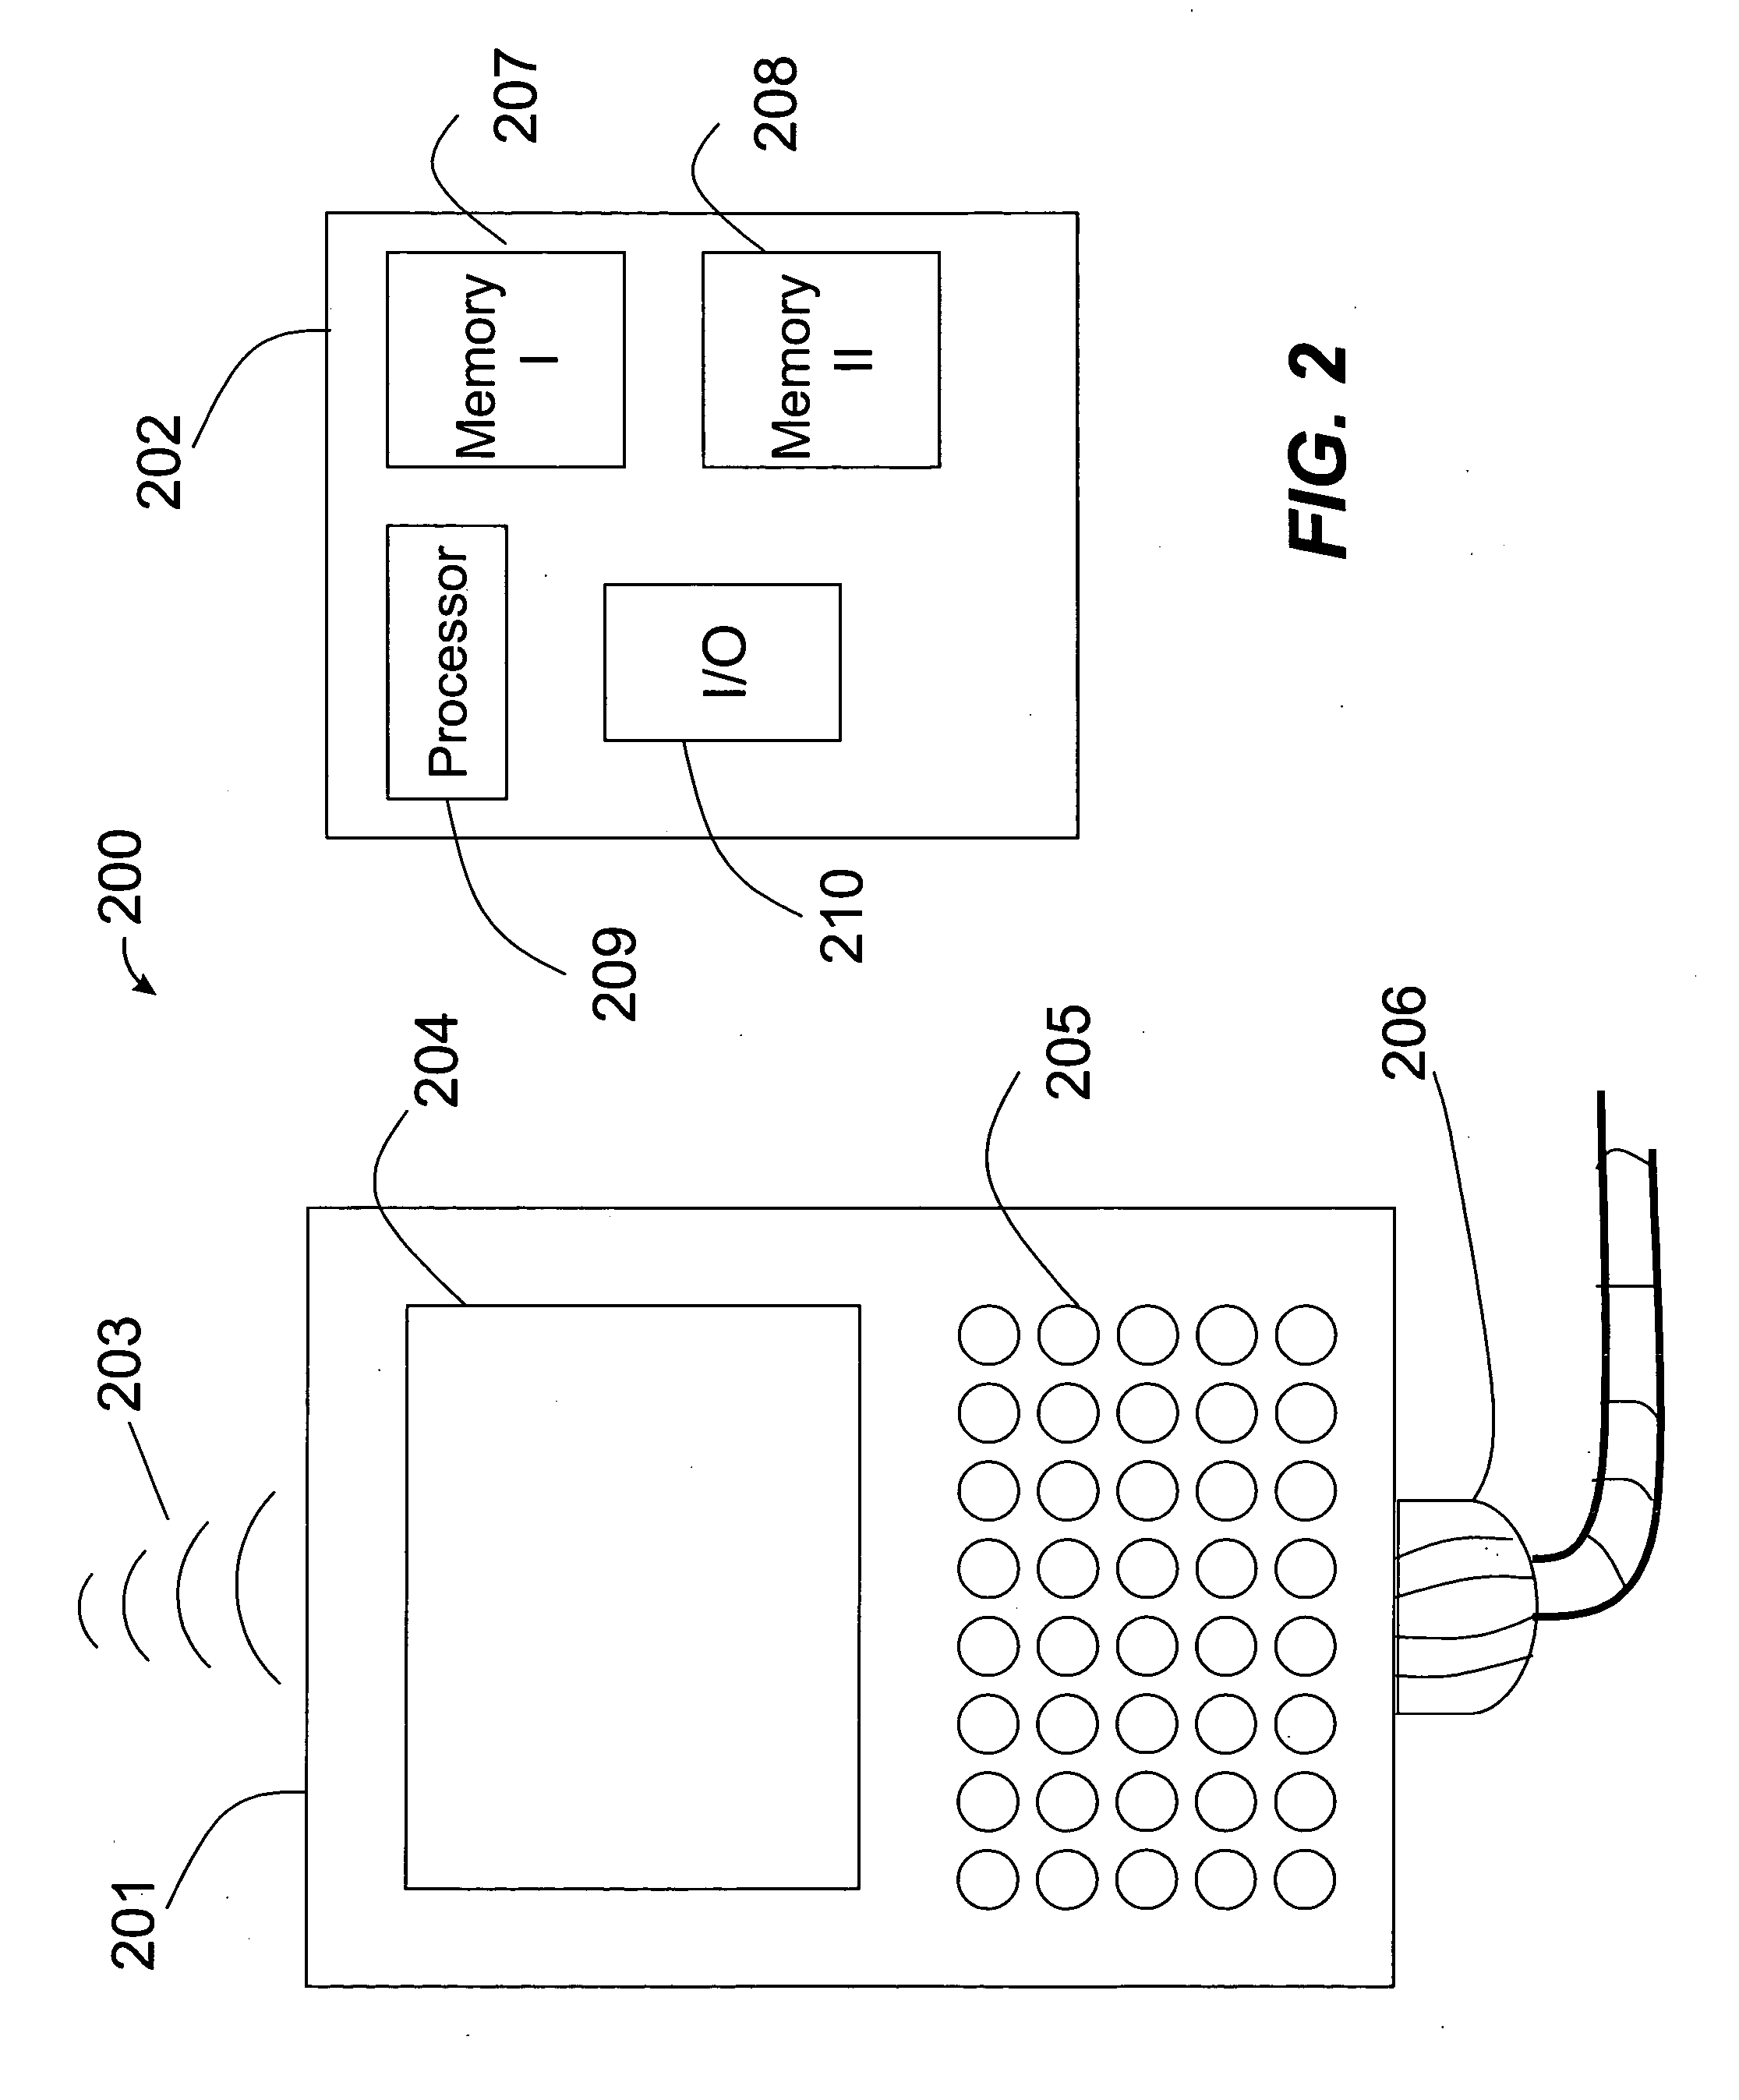 Apparatus and method for peer-to-peer N-way synchronization in a decentralized environment